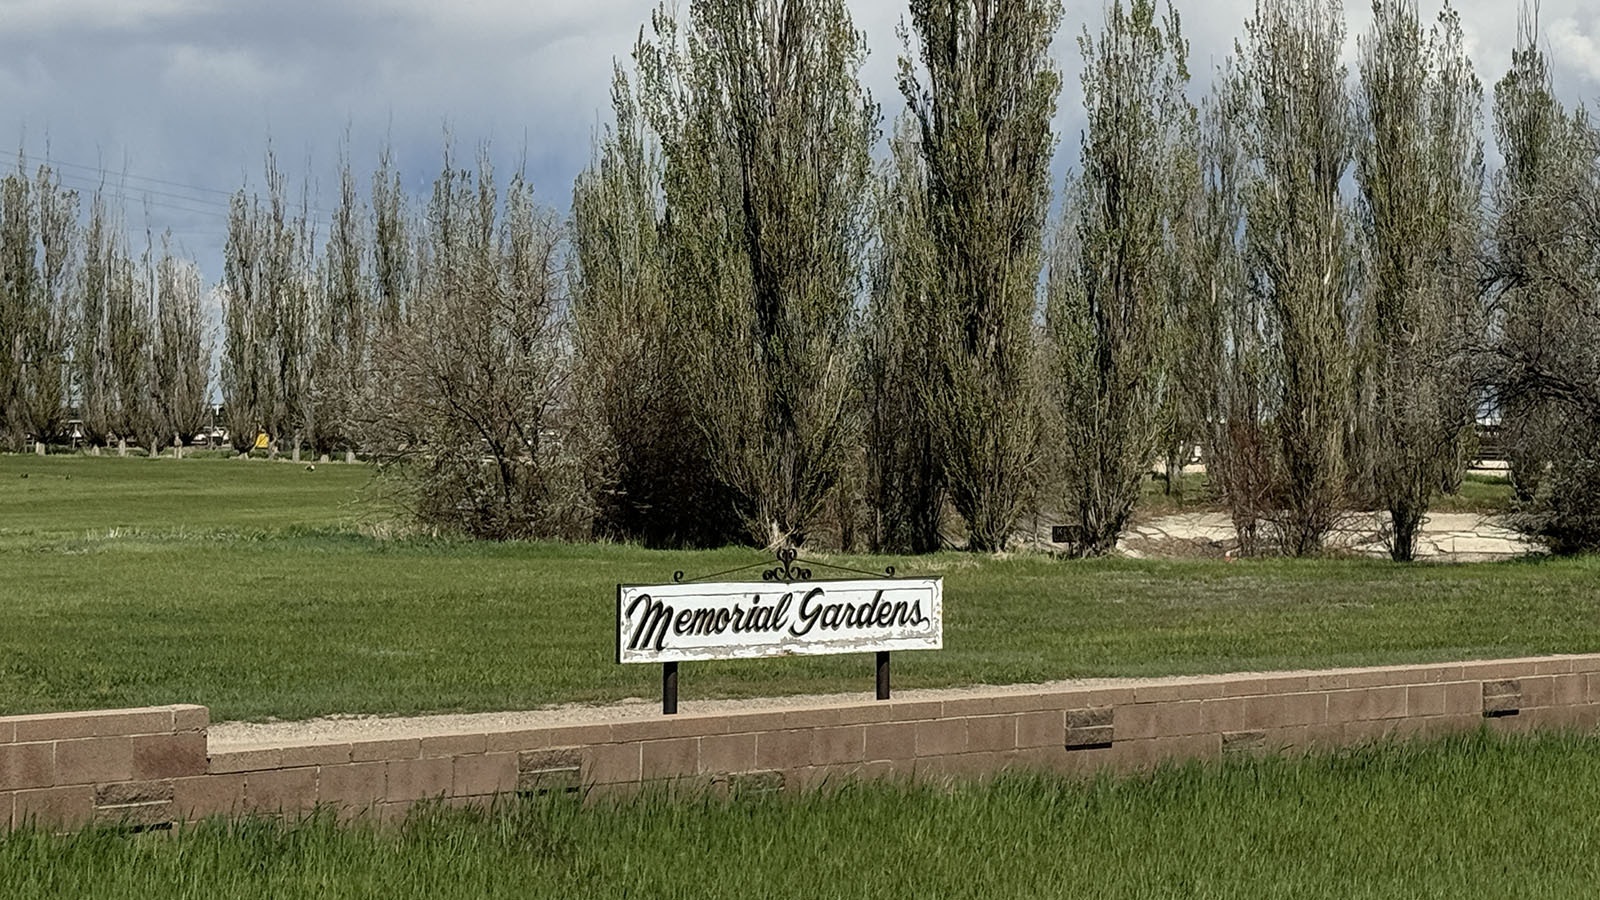 The Memorial Gardens cemetery east of Casper along Yellowstone Highway, is one of at least two cemeteries to take “indigent” cremated remains from local funeral homes in Caper.